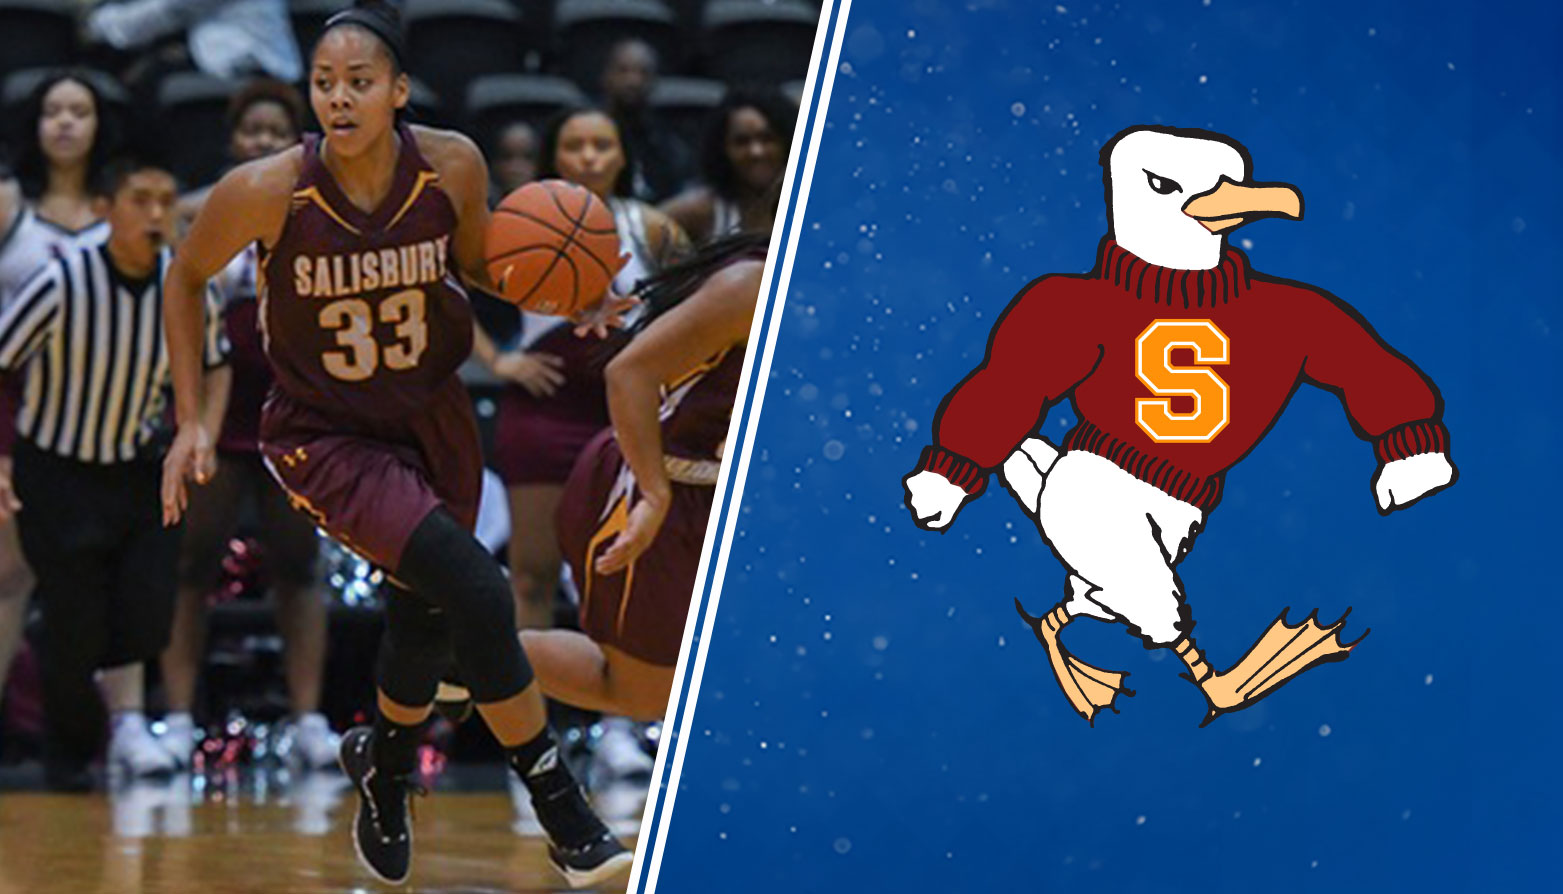 Salisbury's Kaylyn French Earns CAC Women's Basketball Player of the Week Honors